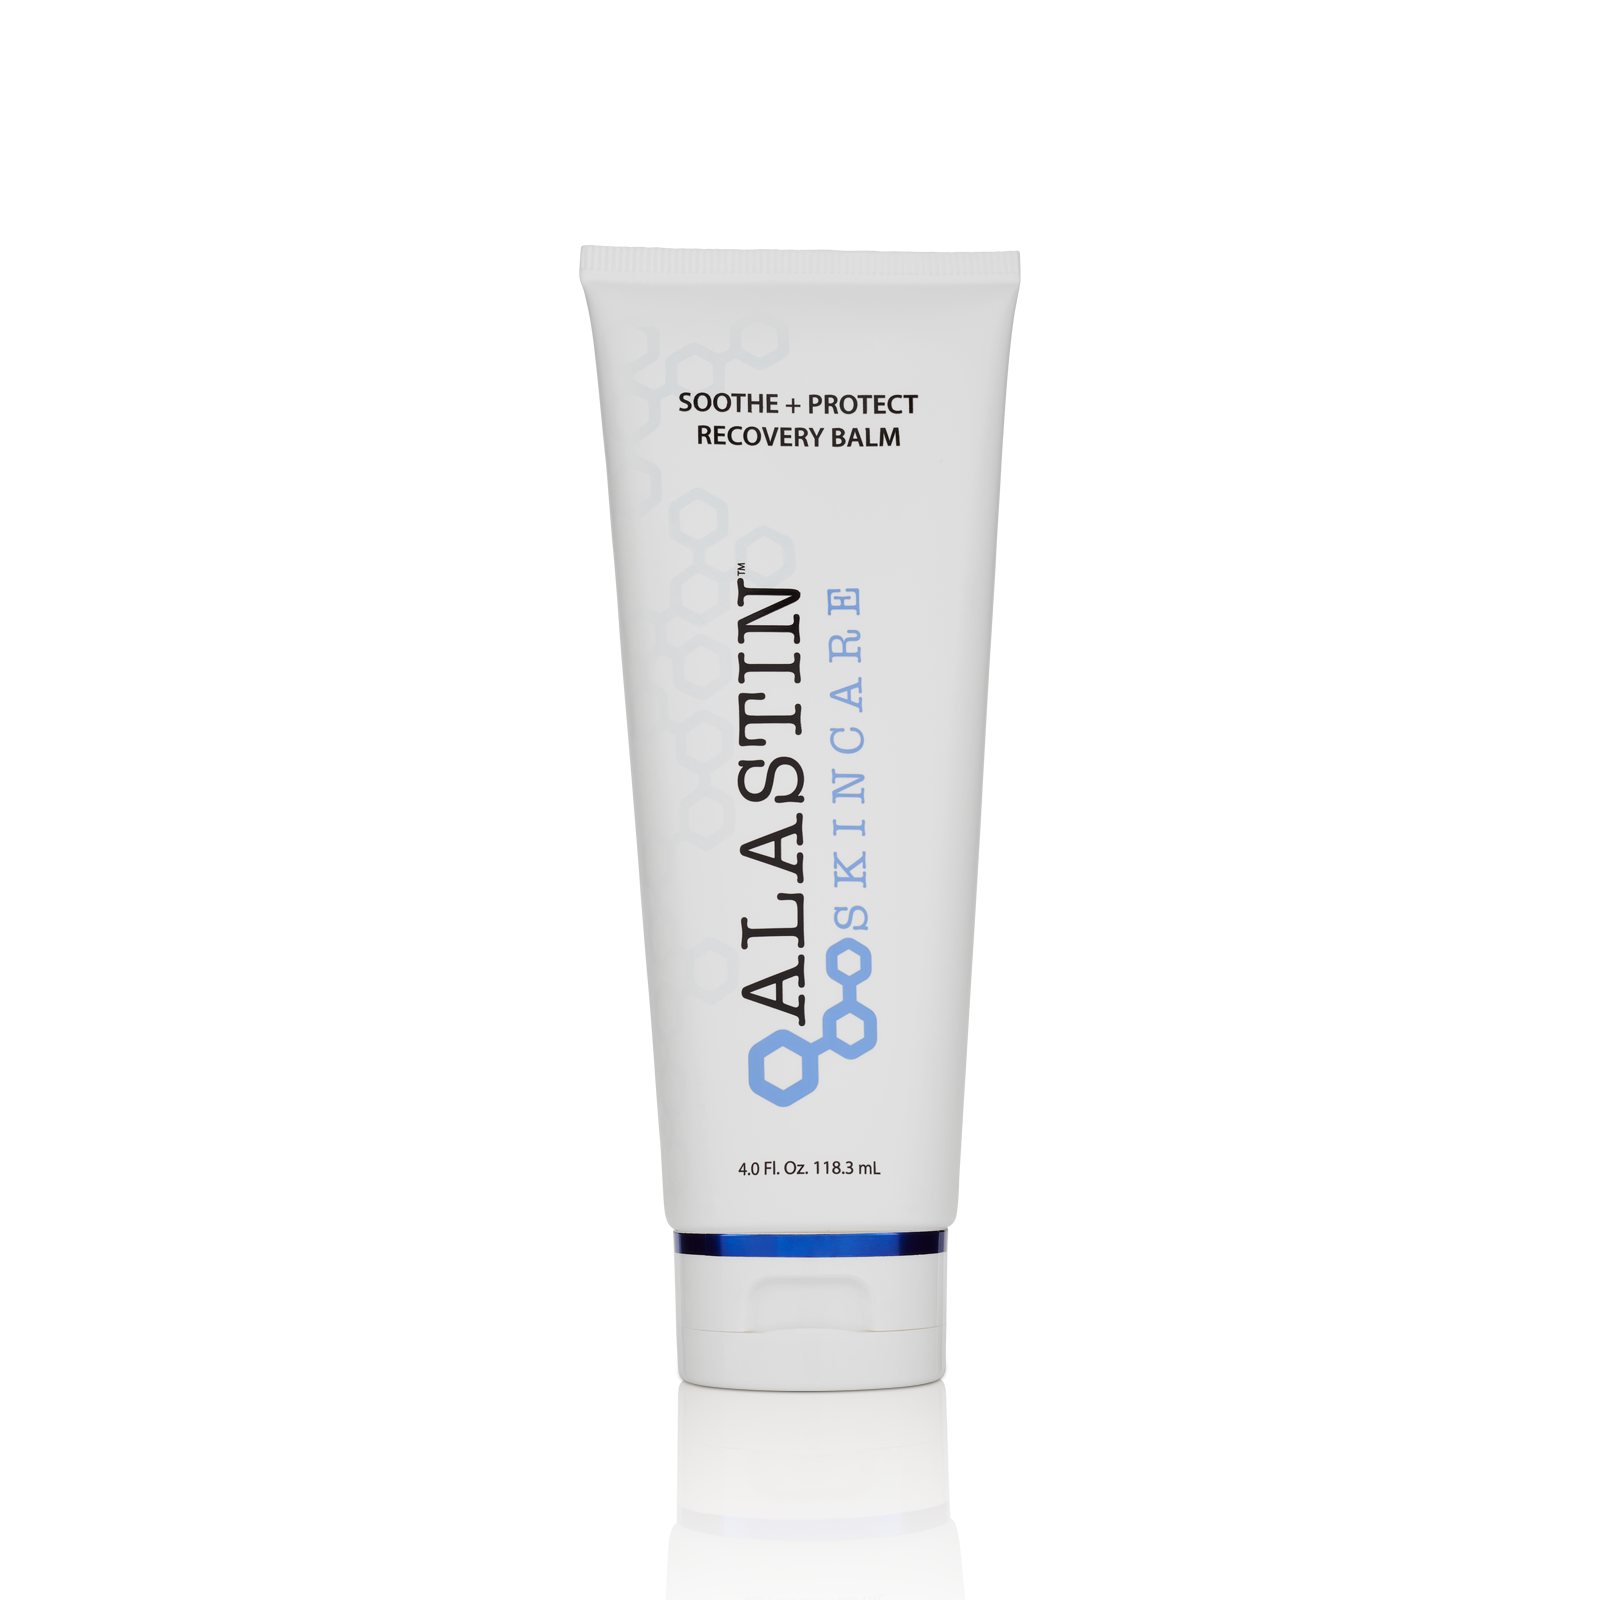 ALASTIN Protect | Balm Recovery + Skincare® Soothe